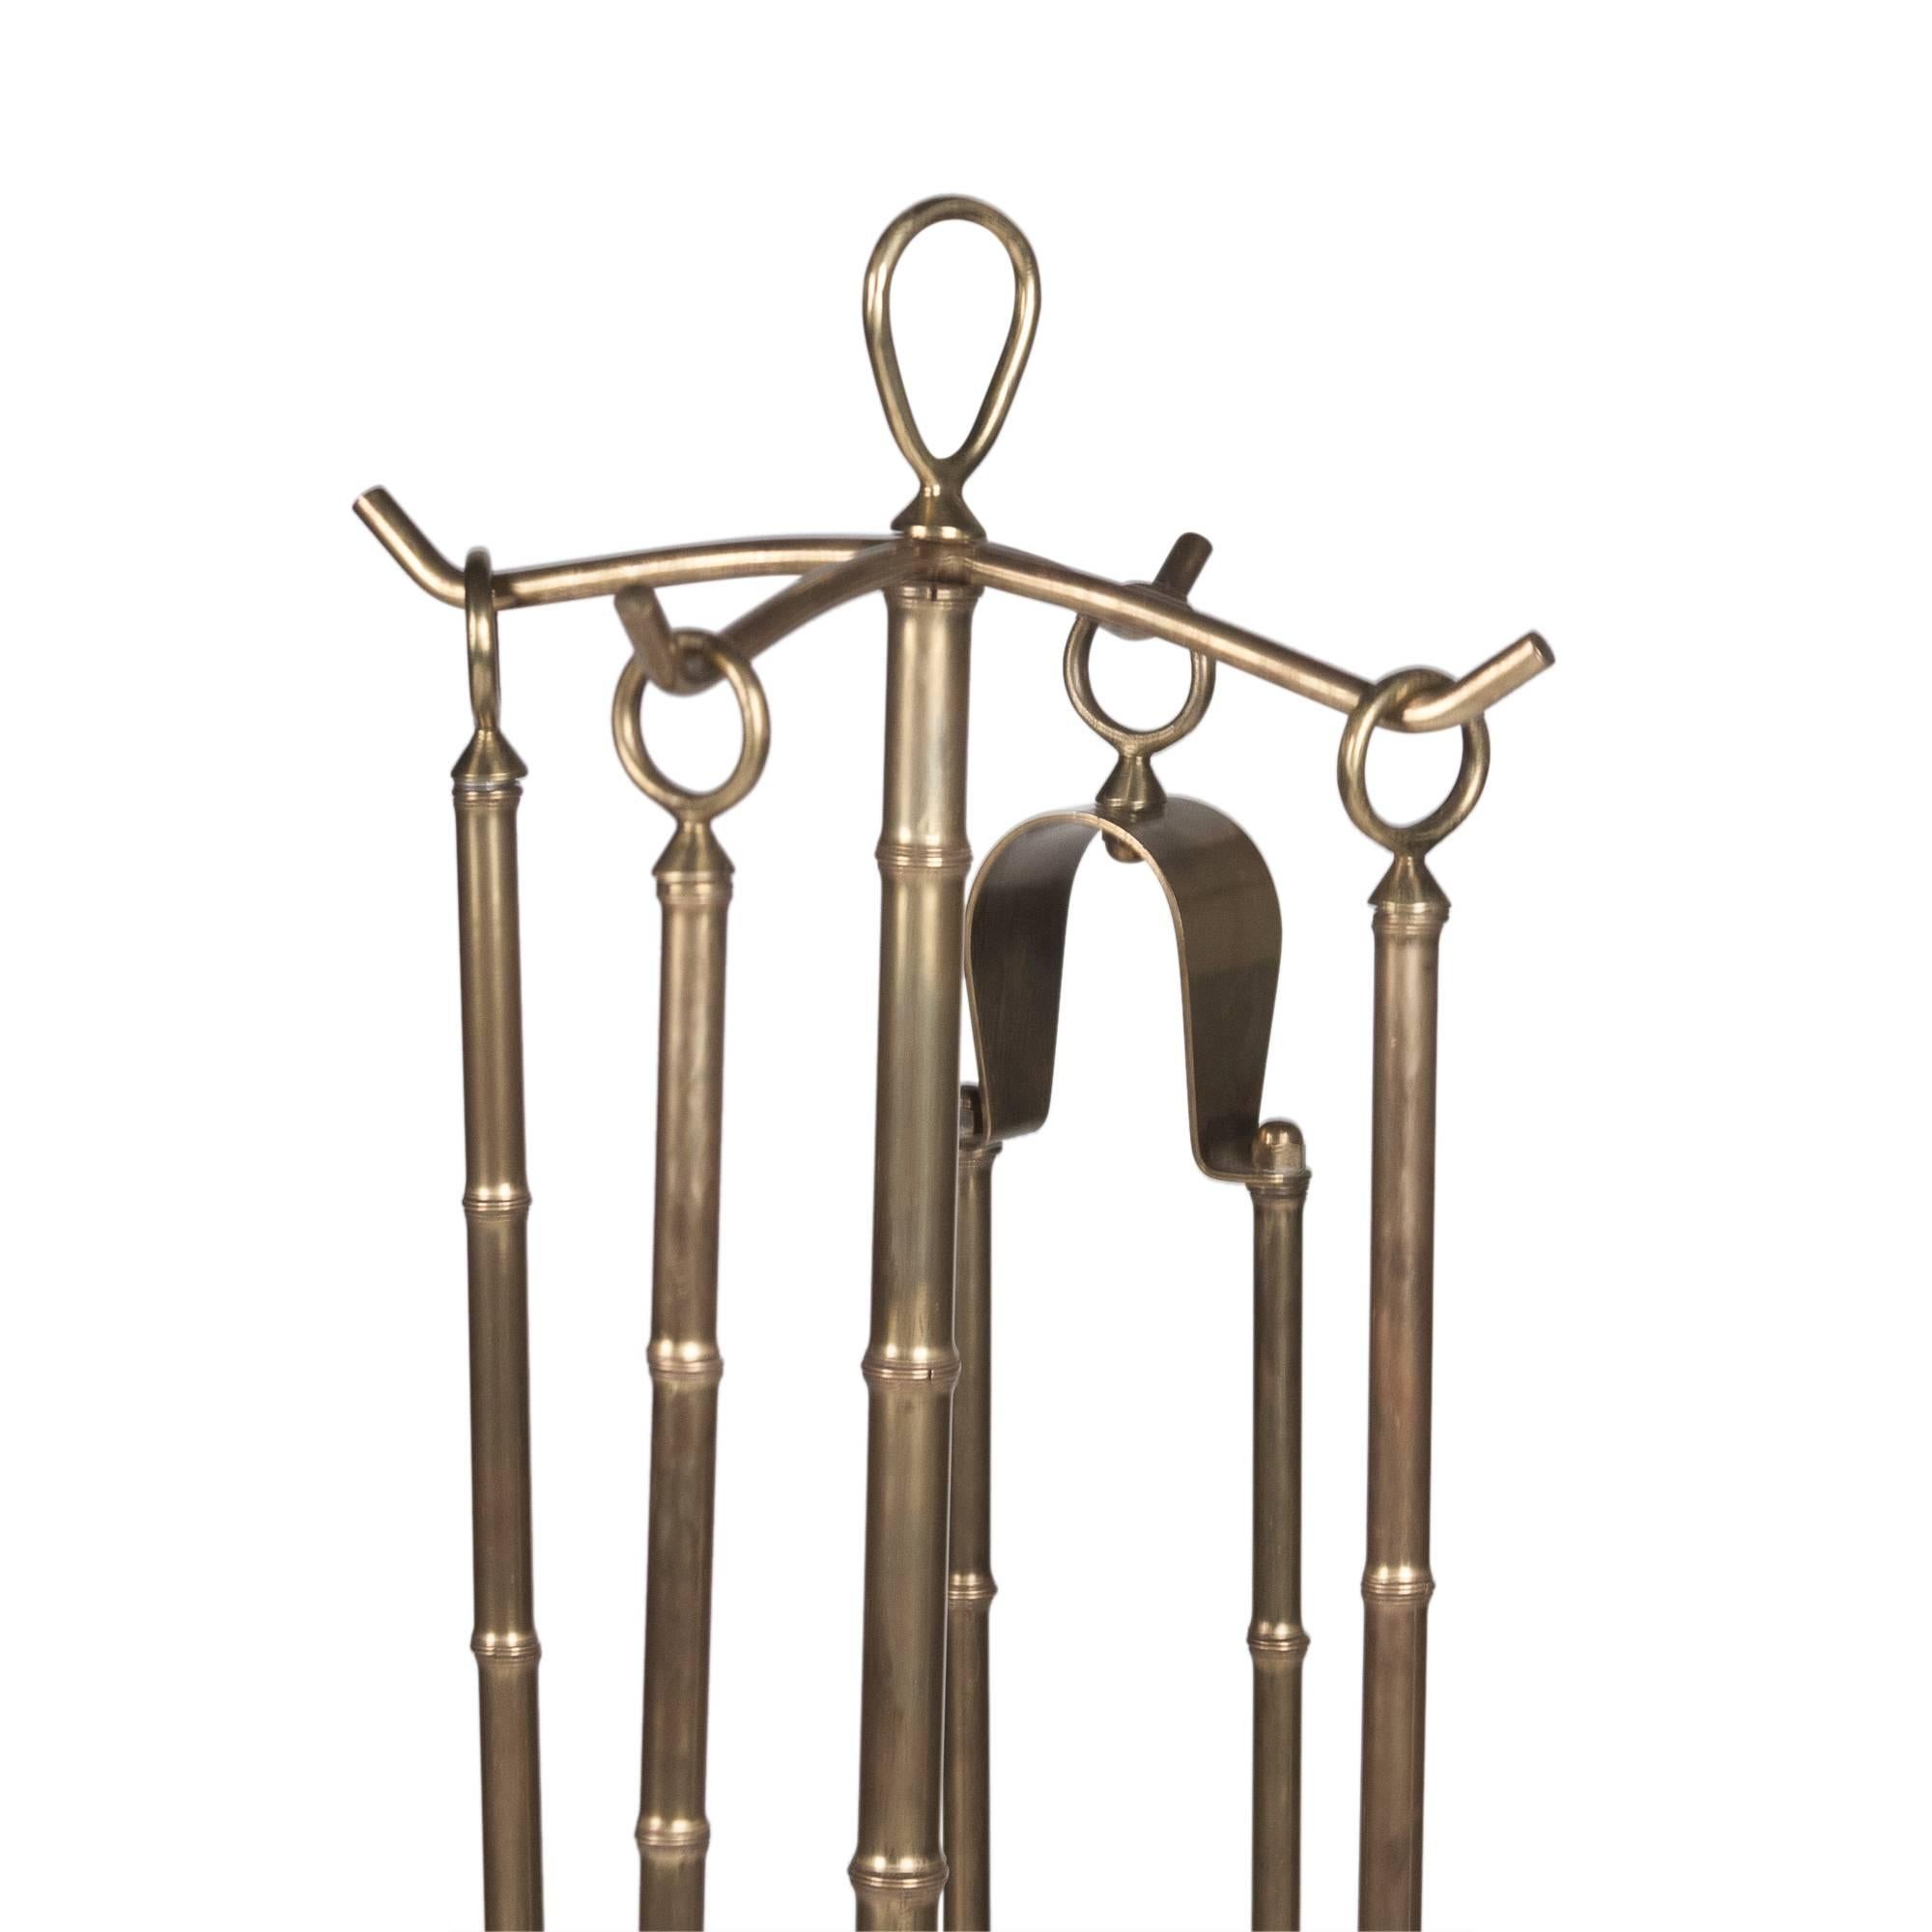 Four-piece fireplace tool set, in bronze and iron, faux bamboo with ball feet, comprising a shovel, broom, log tongs and poker on a stand, by Jacques Adnet, French, circa 1950. Overall dimensions: 27 in. H x 10 in. W x 10 in. D.